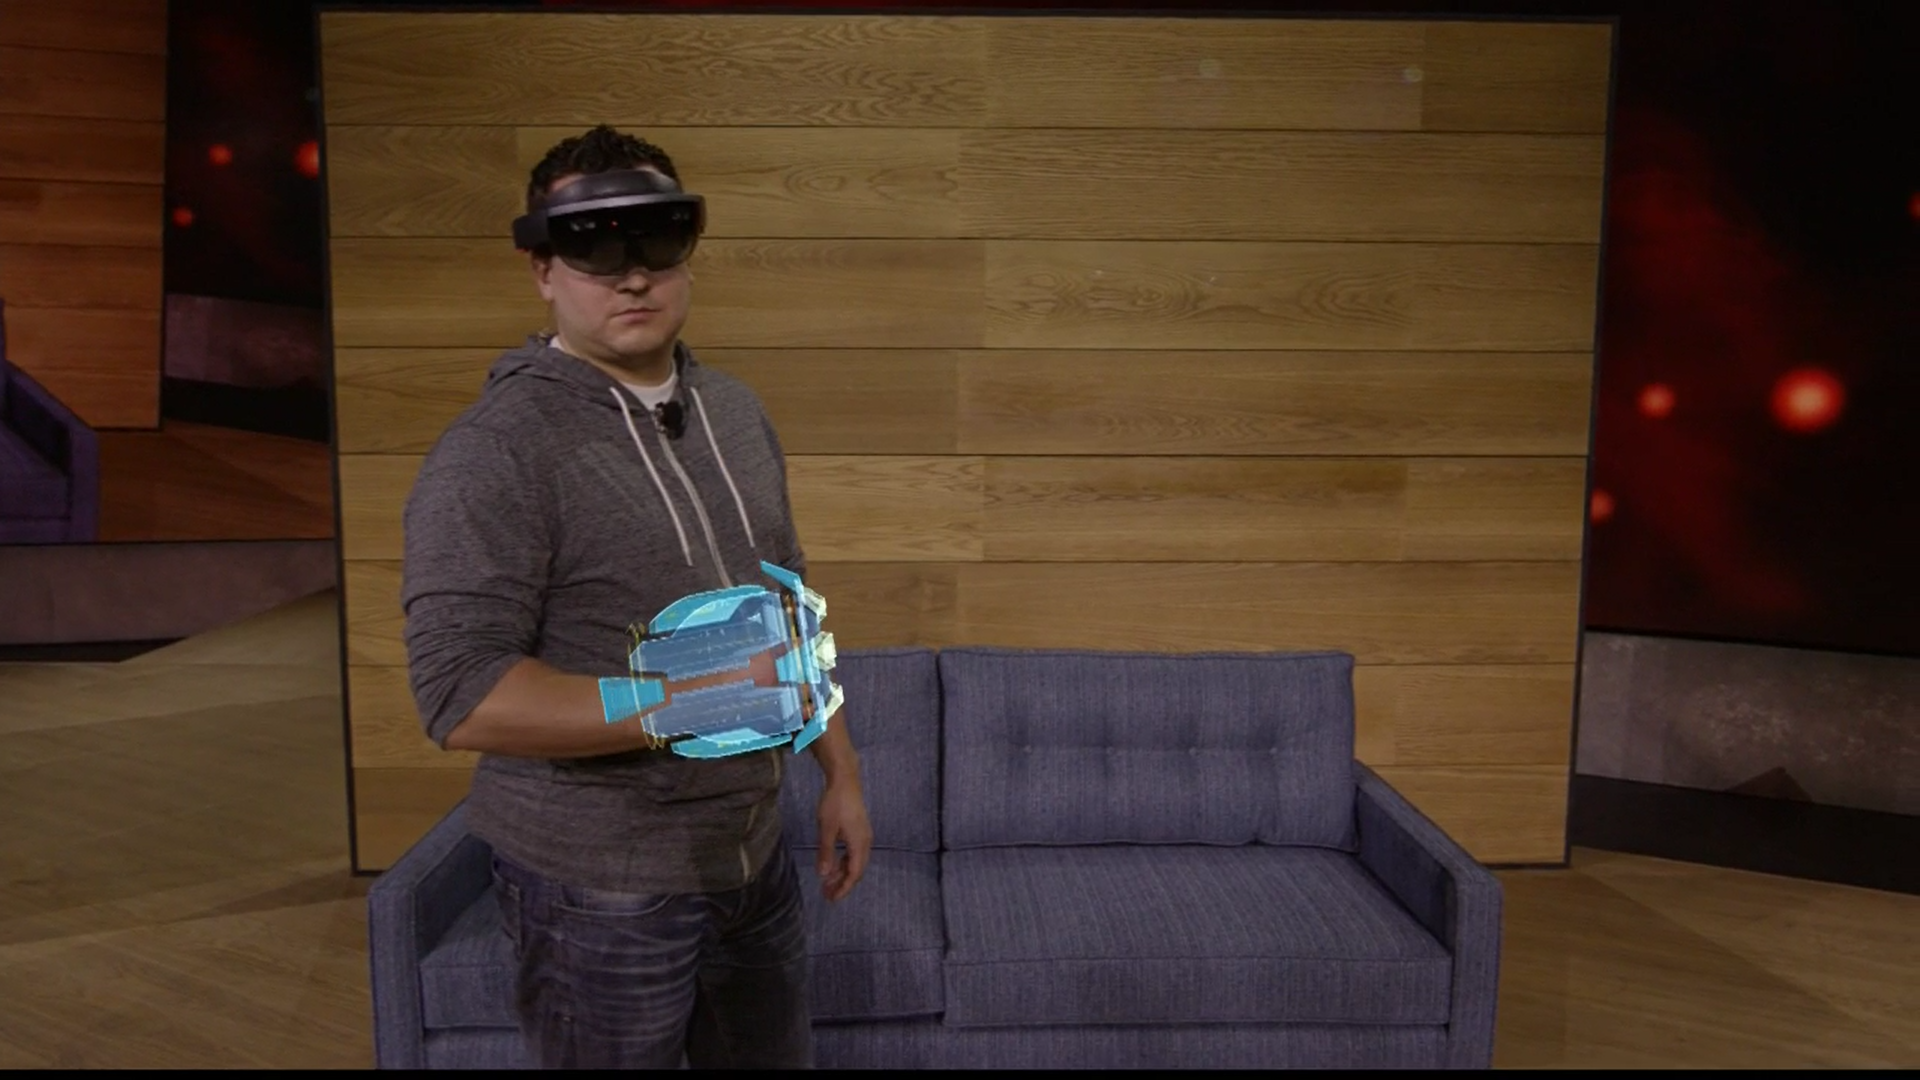 microsoft hololens may not reach consumers for a while it has a hot issue to deal with image 1